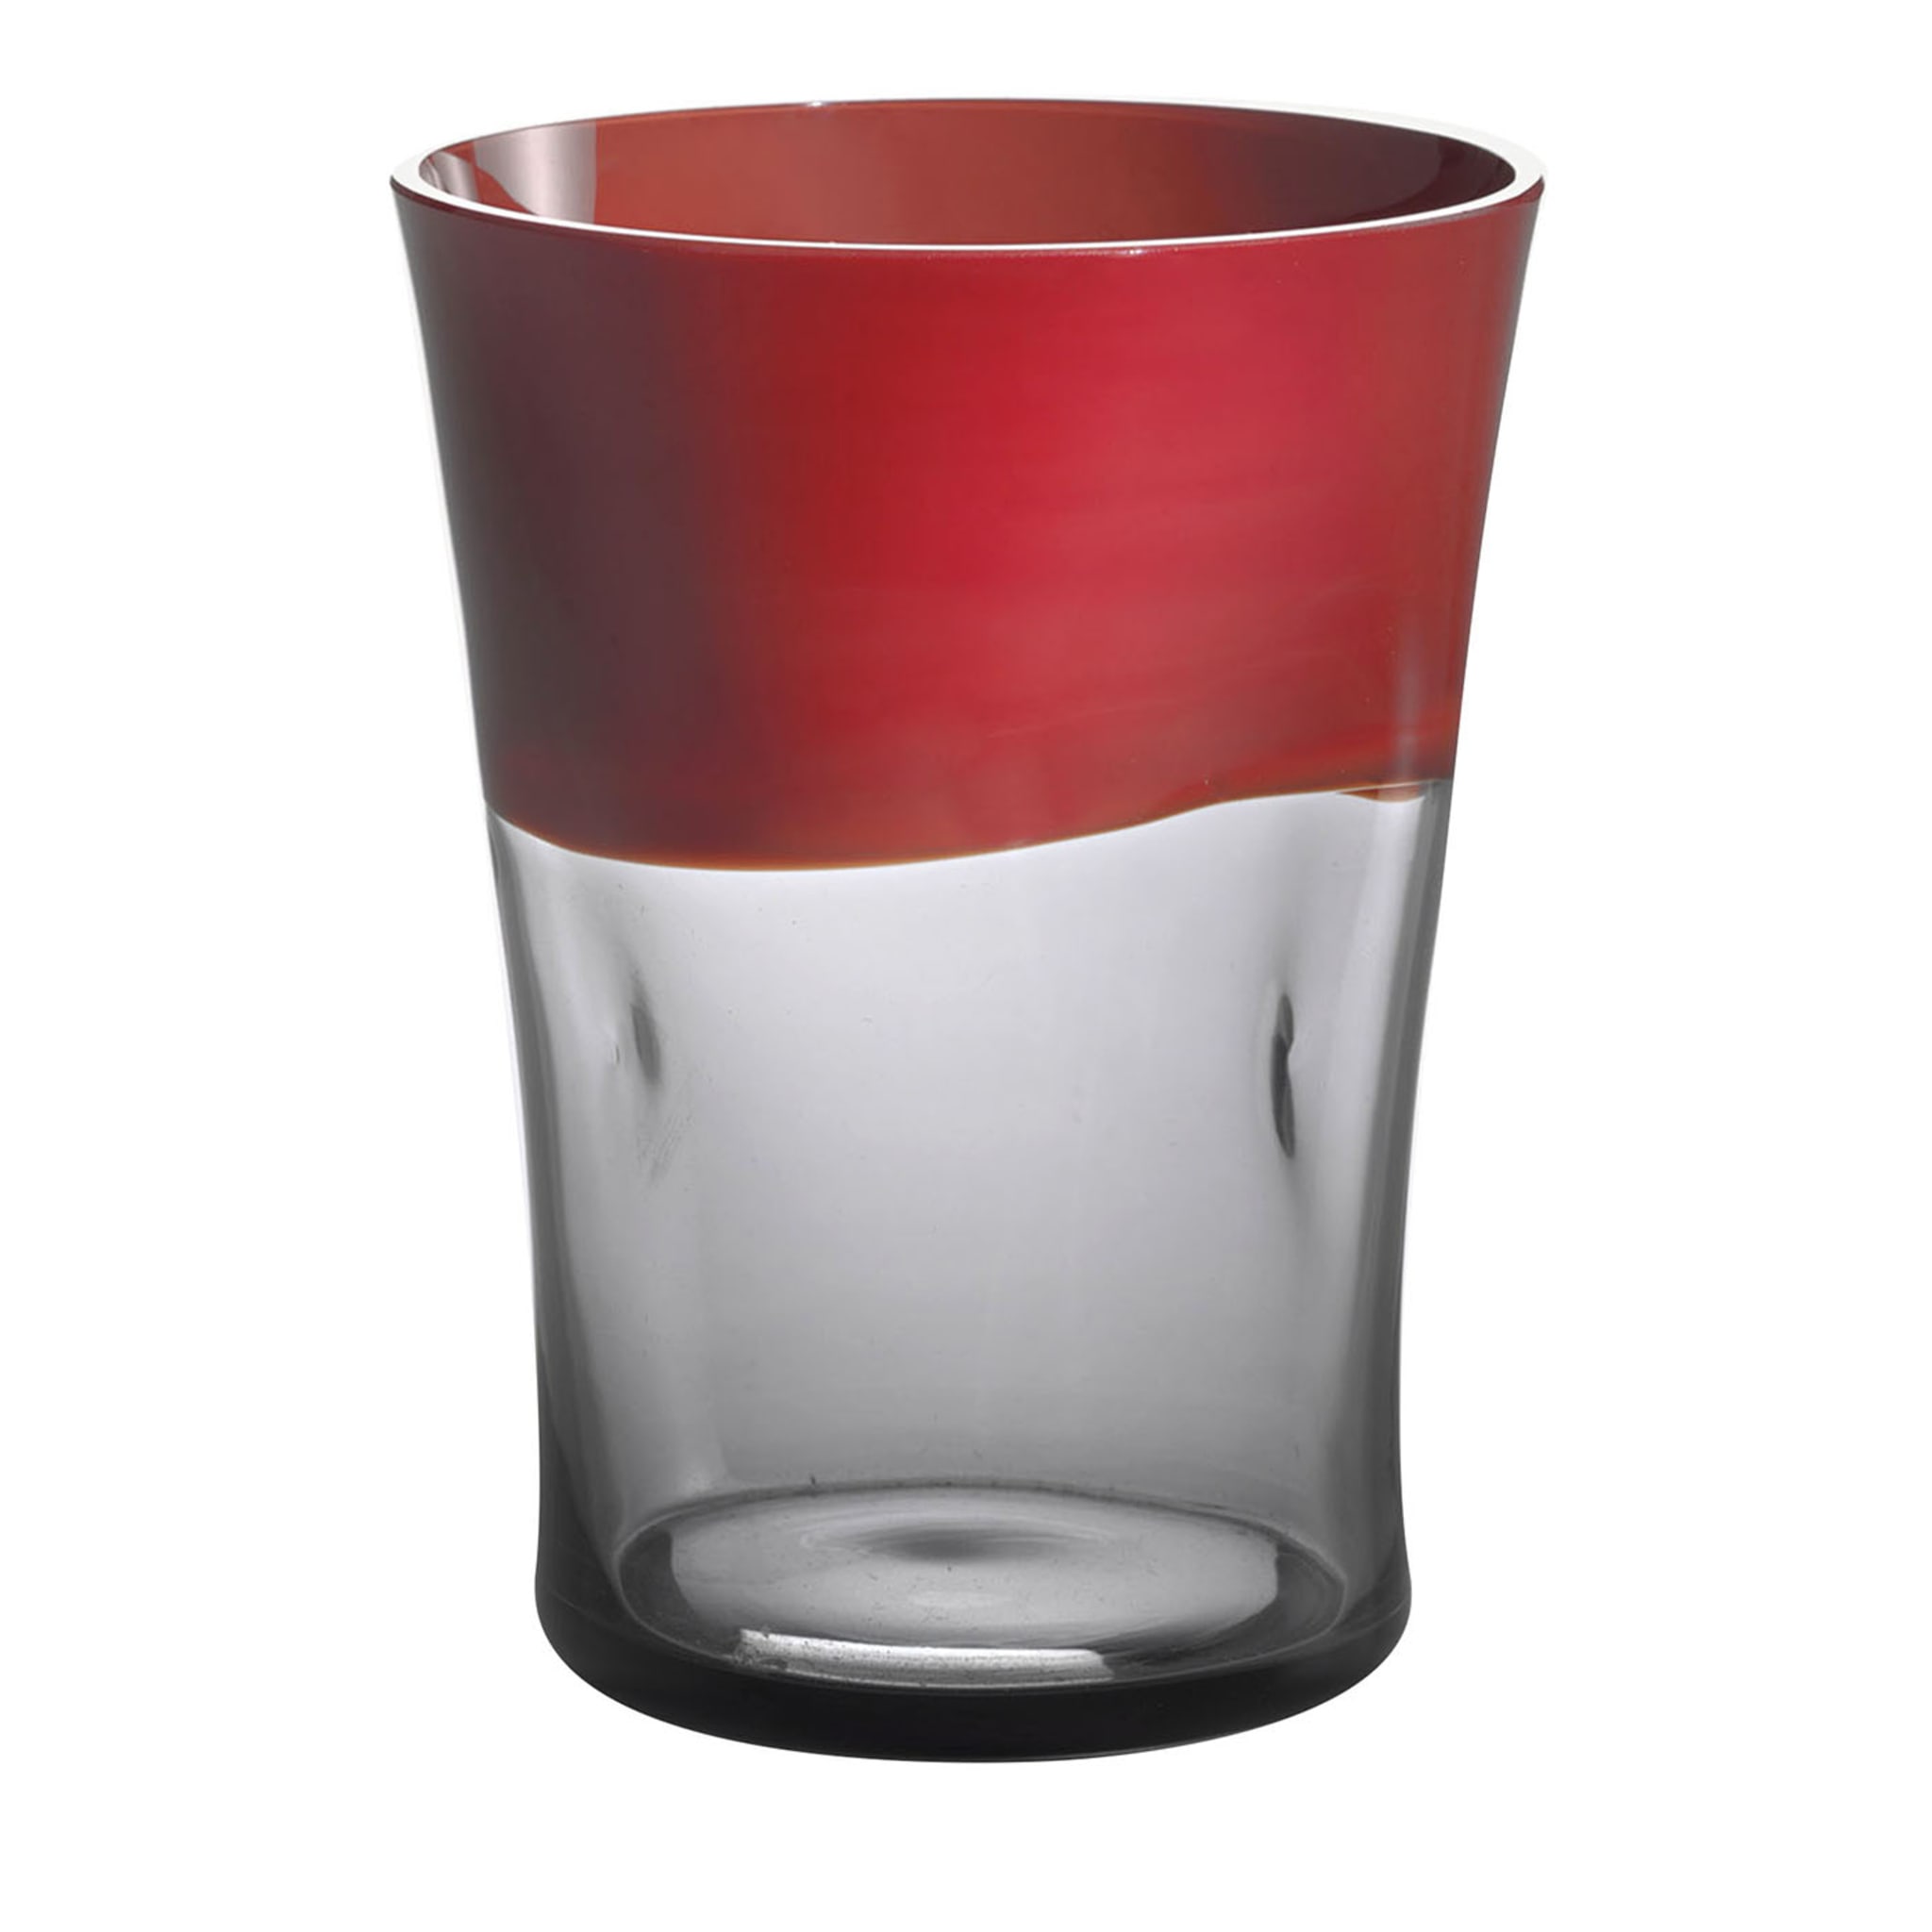 Dandy Red & Gray Glass by Stefano Marcato - Main view